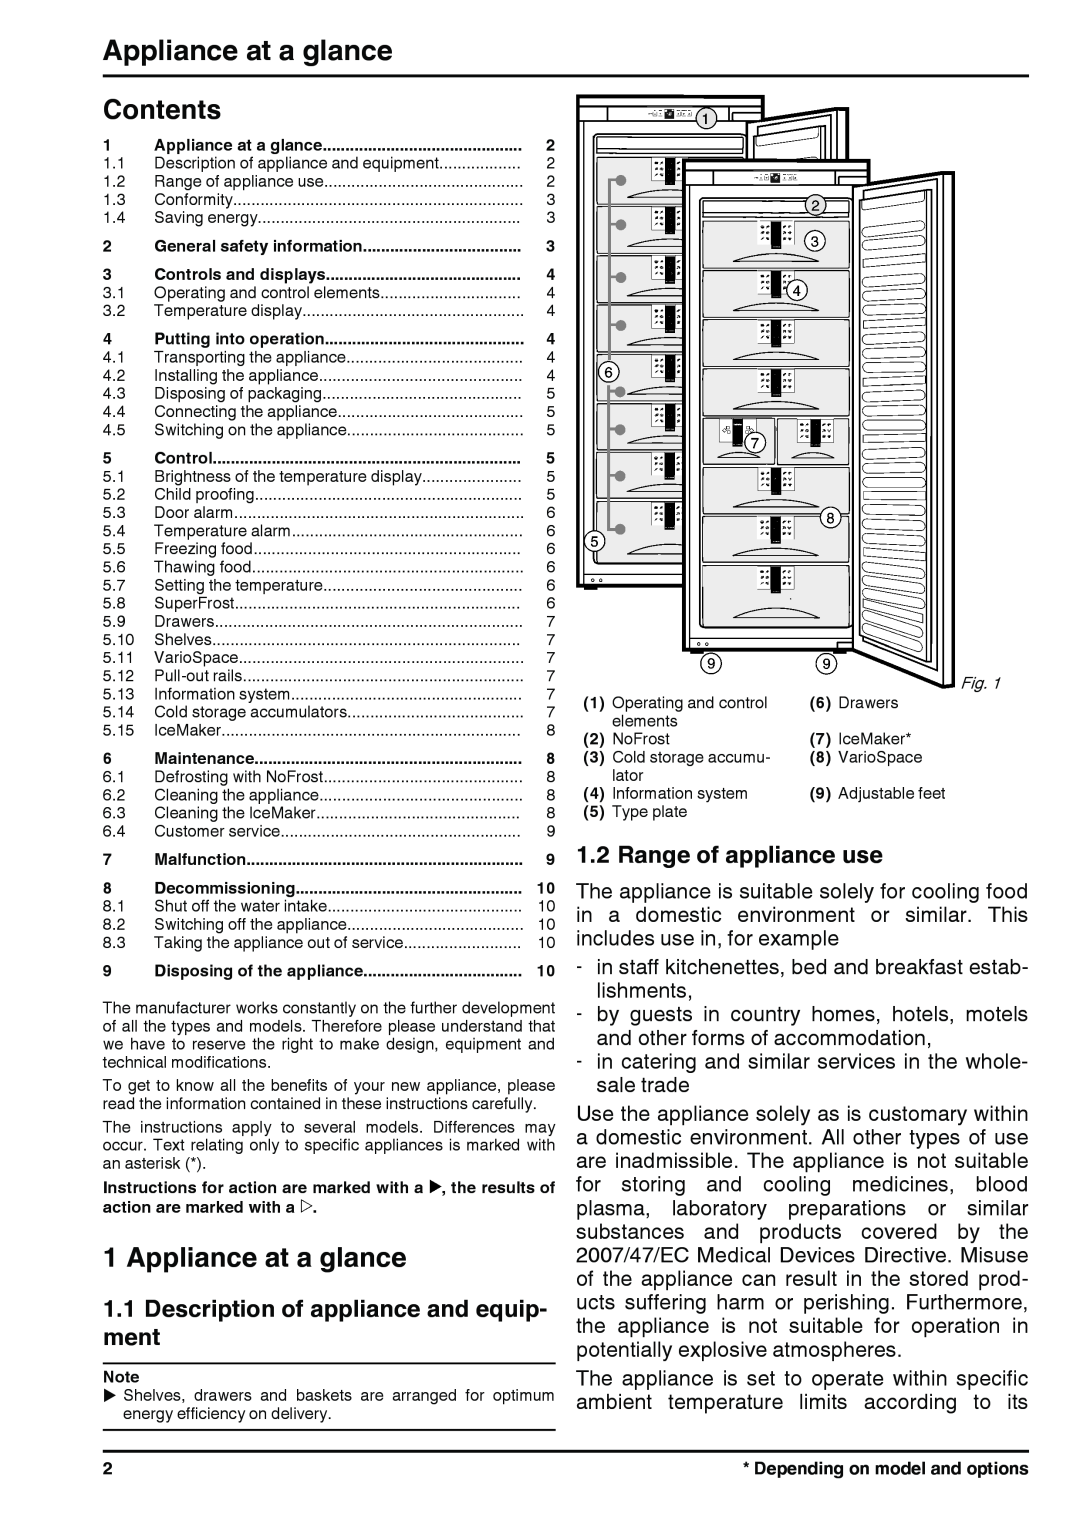 Liebherr 120713 7082694 - 01 manual Appliance at a glance, Contents, Description of appliance and equip- ment 